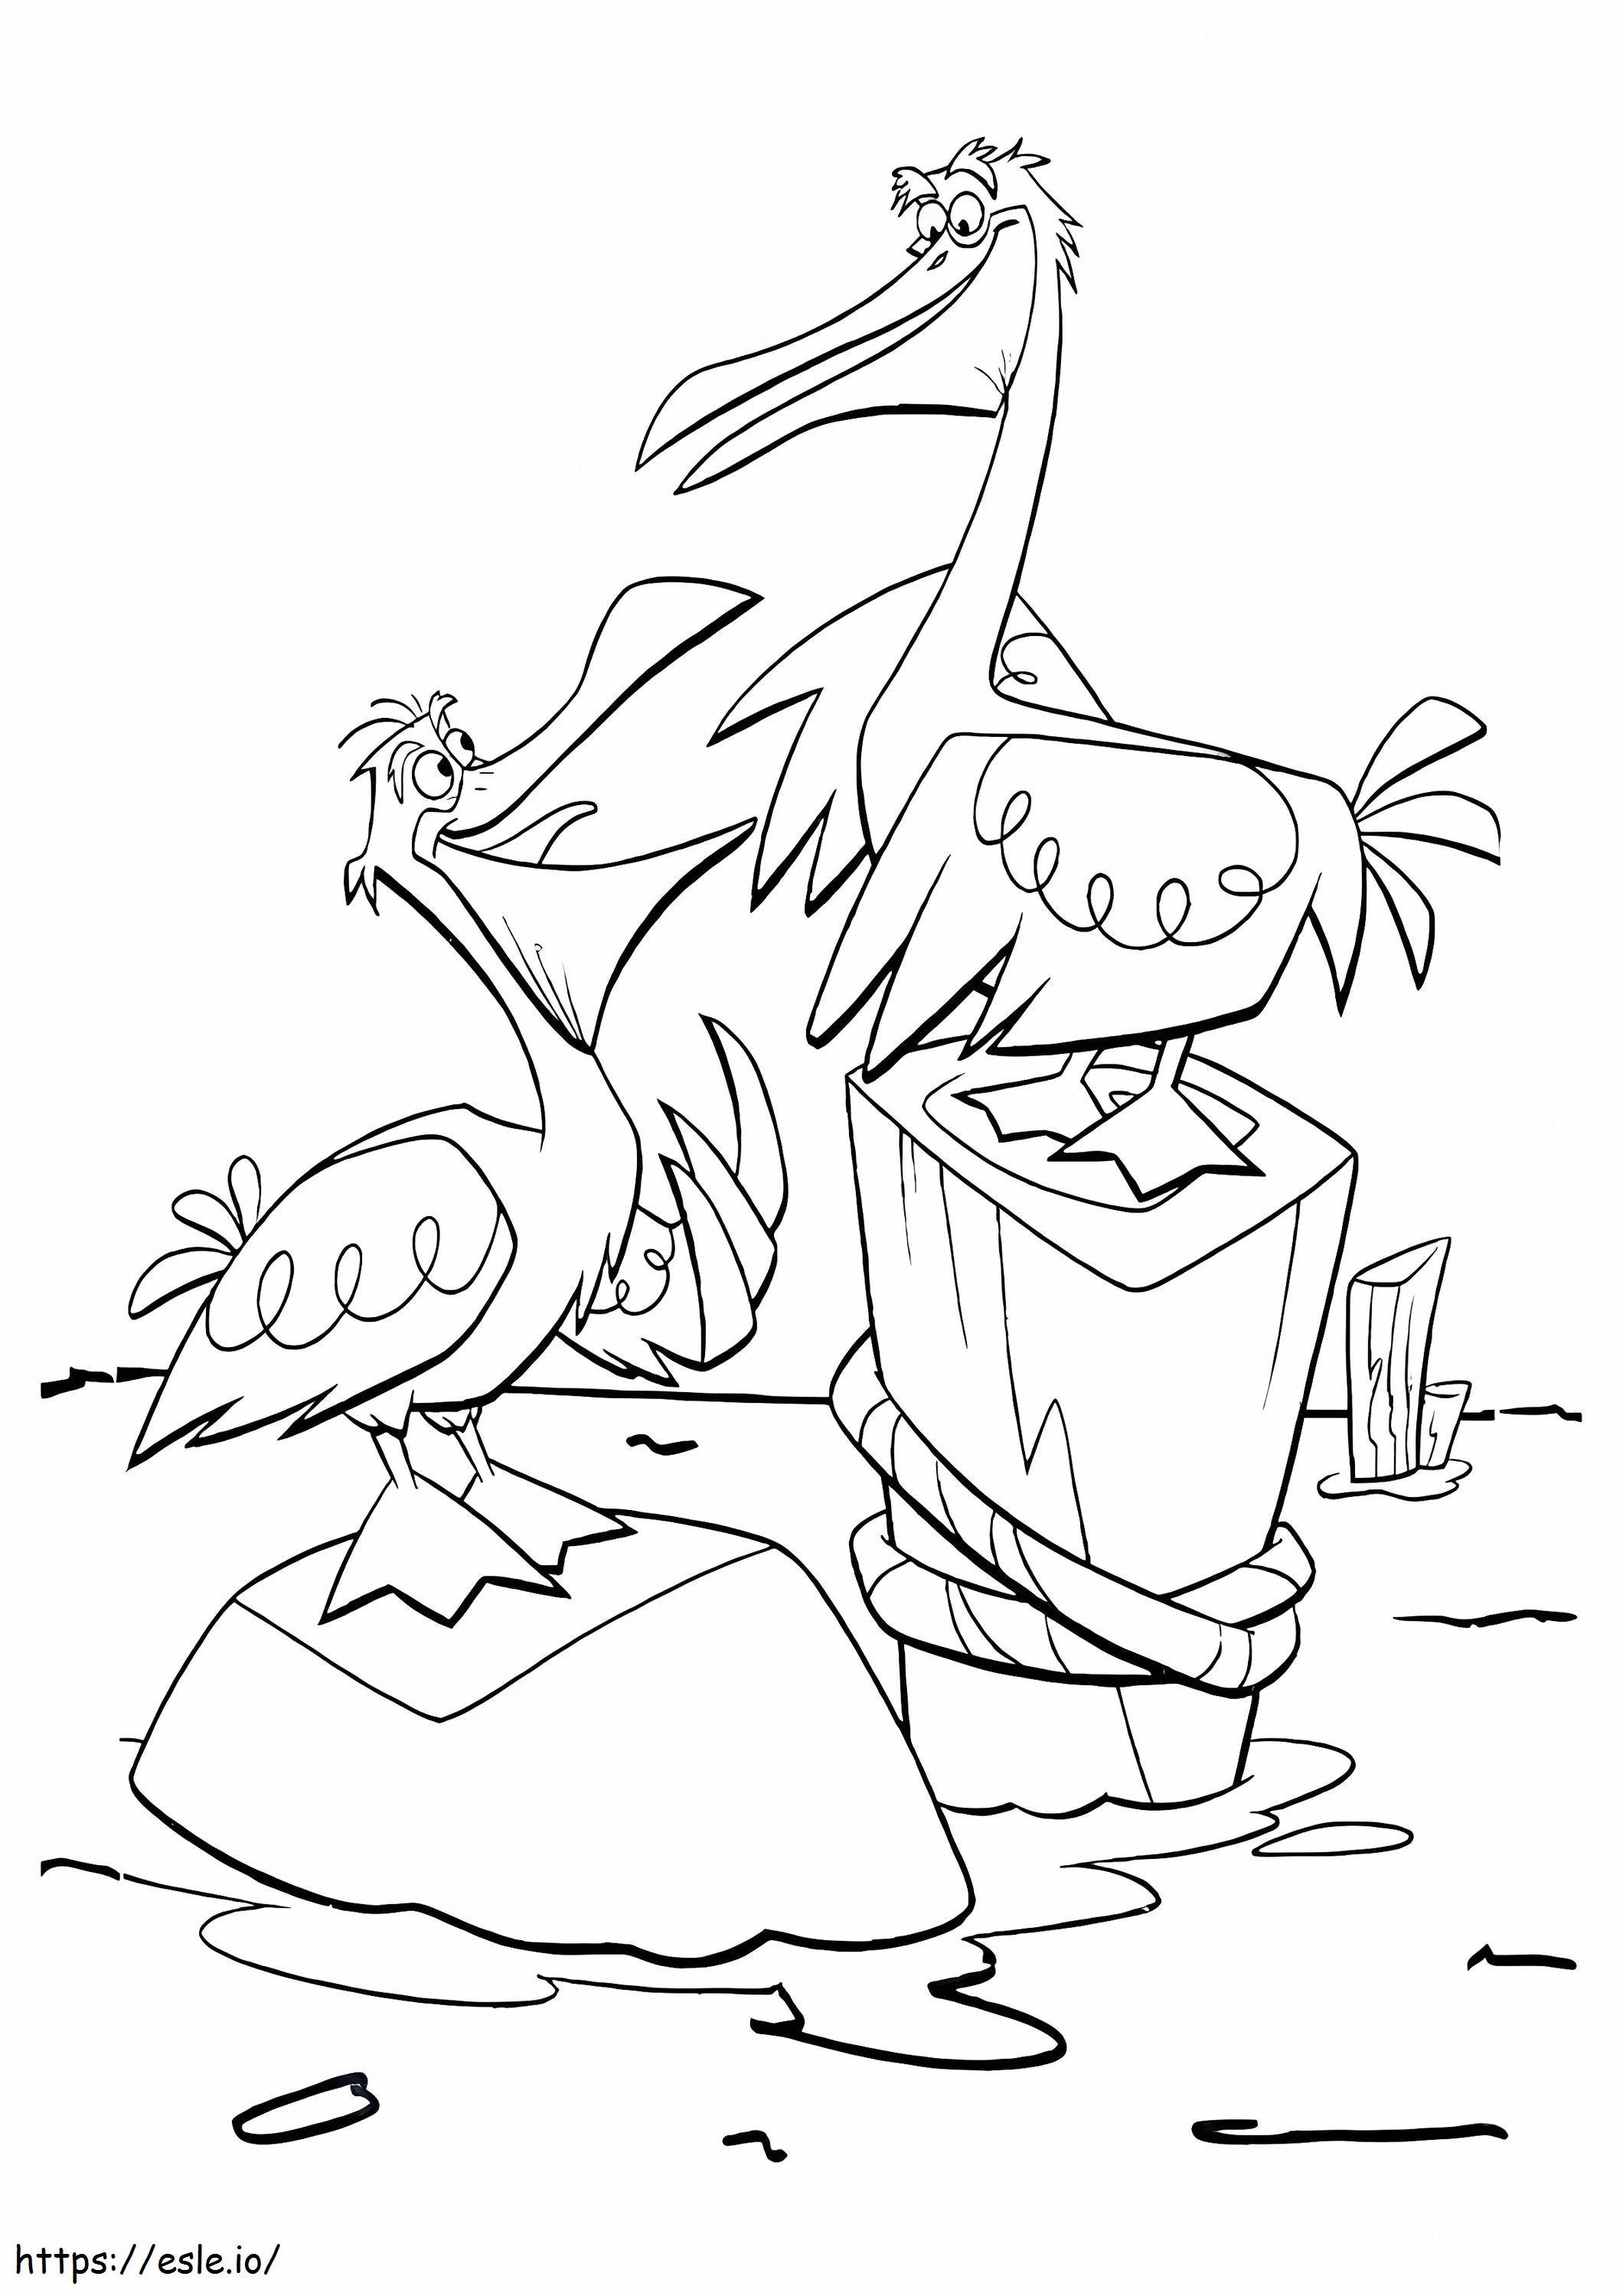 1526459986 A Pair Of Pelicans A4 coloring page